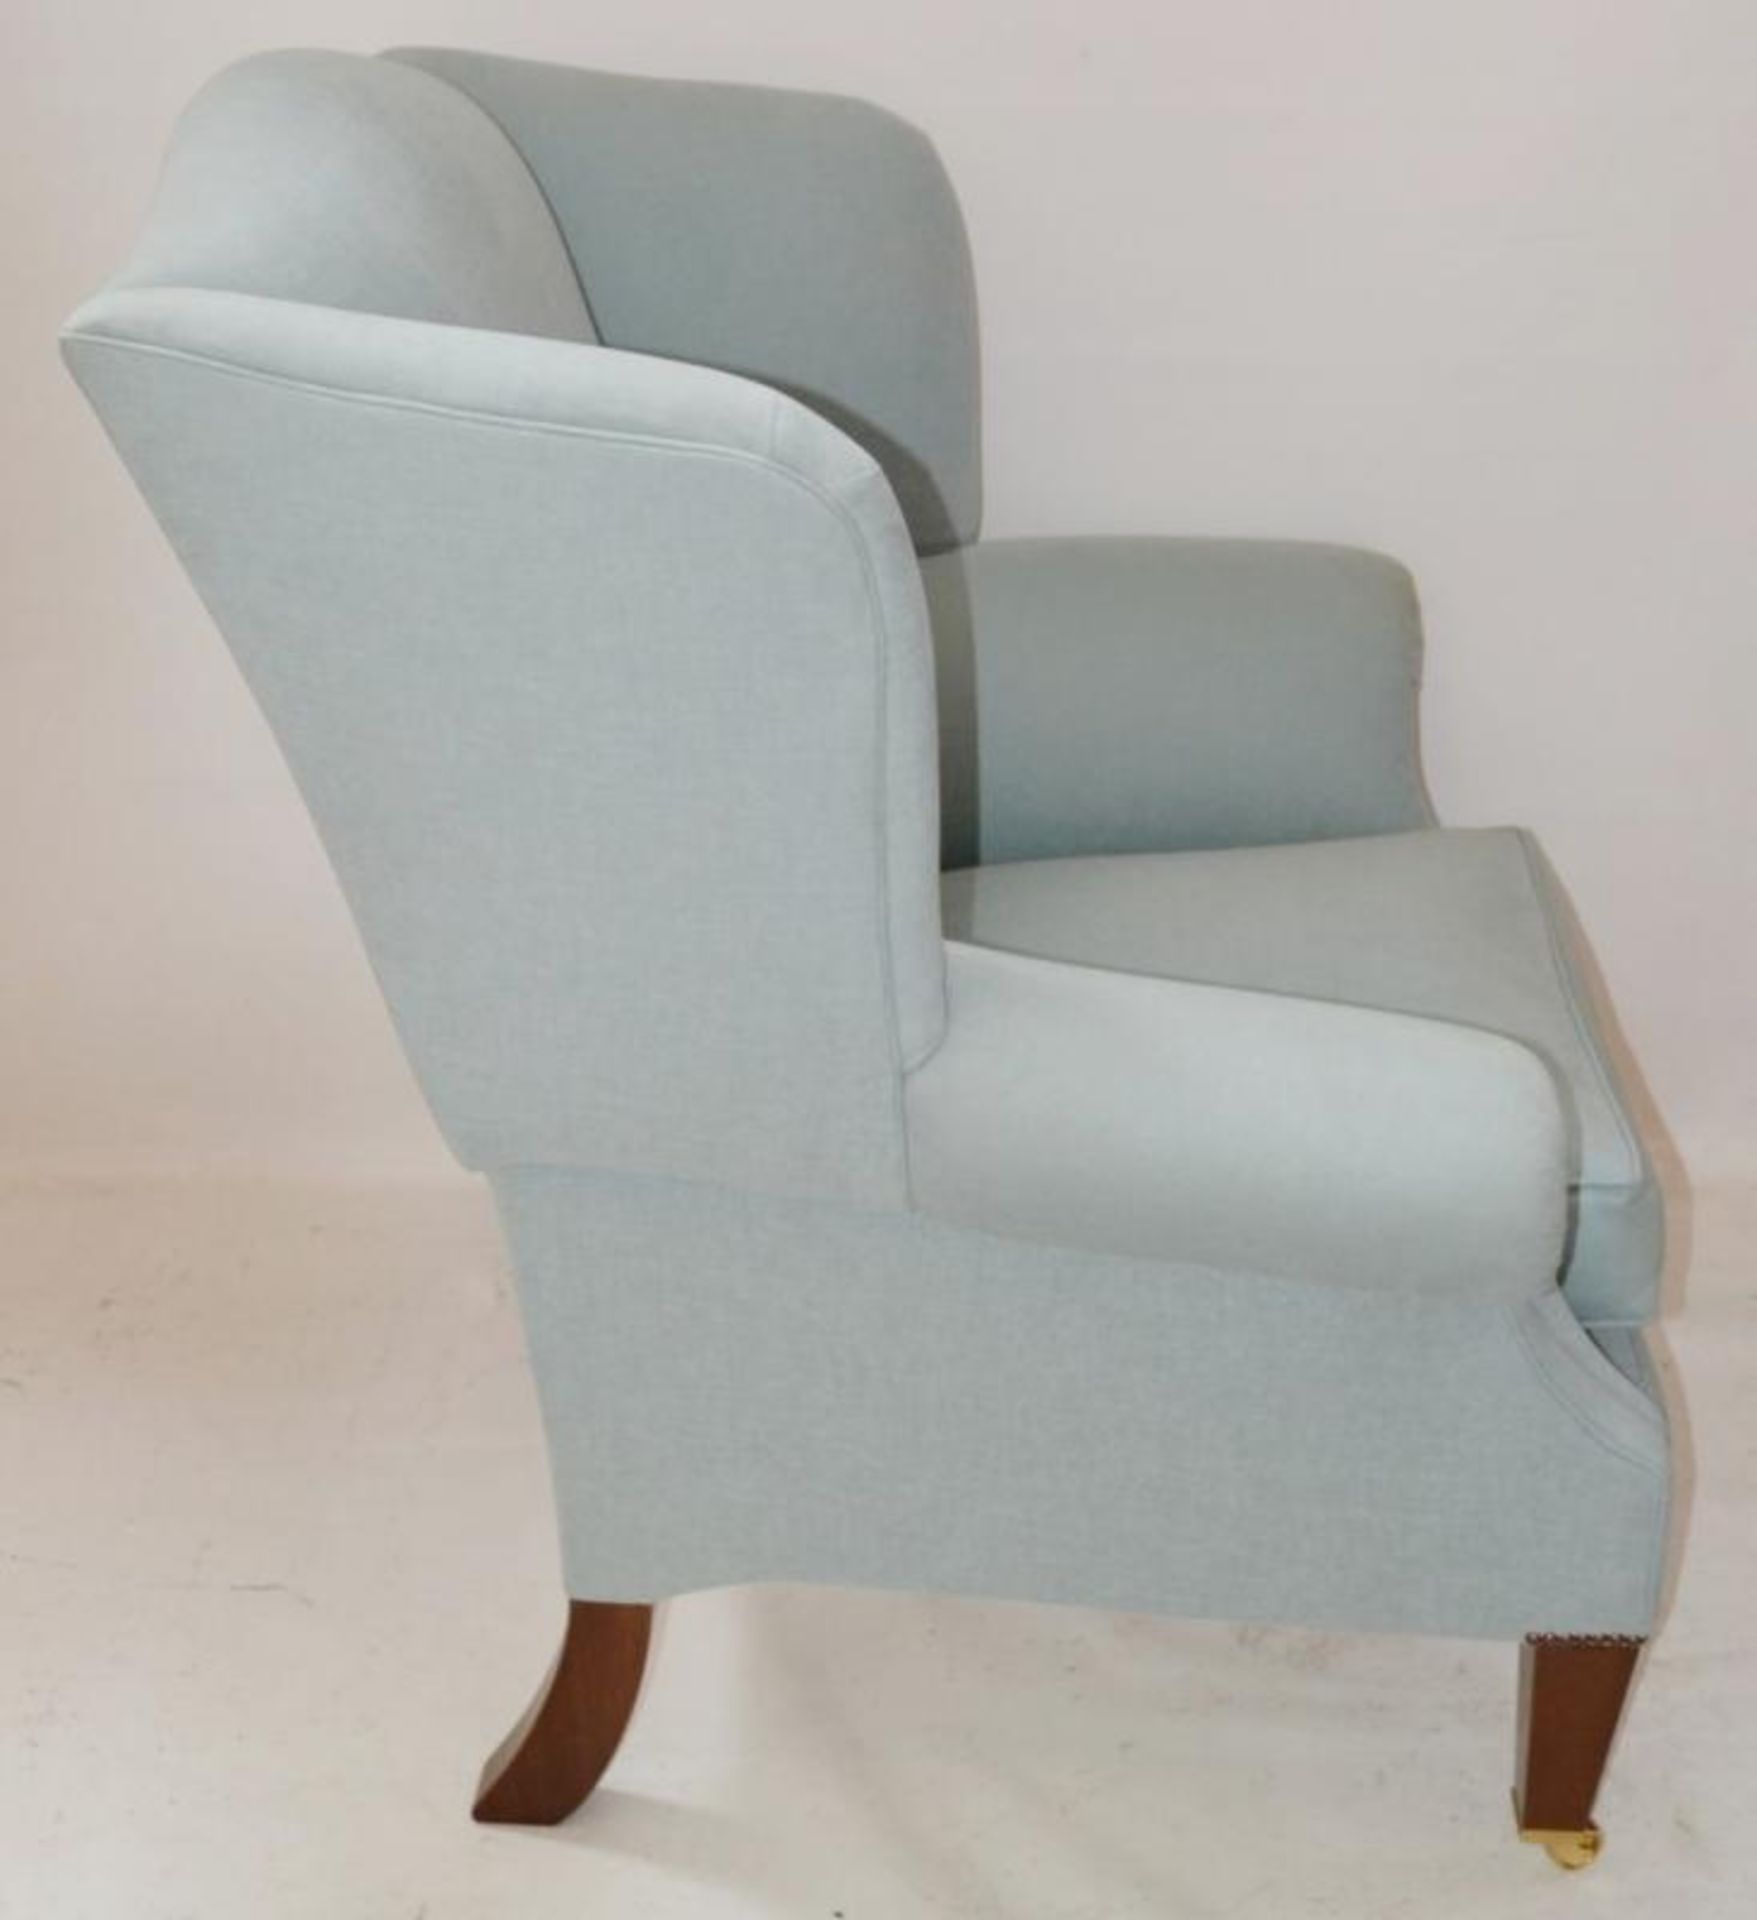 1 x Duresta "Somerset" Wing Chair Light Blue - Dimensions: 113H x 91W x 92D cms - Ref: 3143184-A NP1 - Image 2 of 8